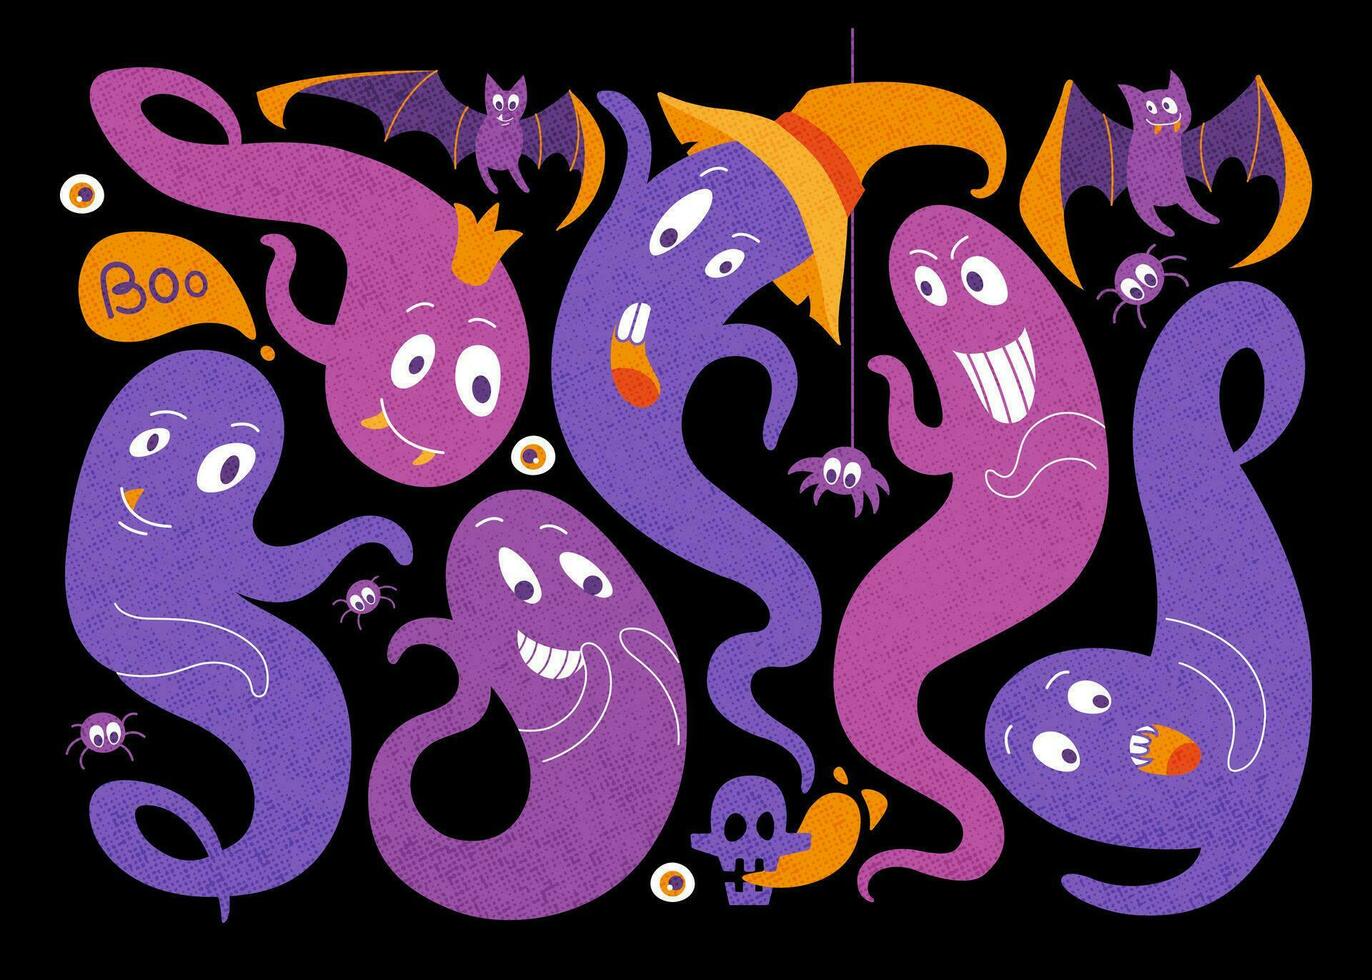 Spooky halloween ghost. Scary ghost characters, fly funny spook, cute smiling scare halloween ghost mascots vector illustration set. Halloween spooky cartoon poltergeist.